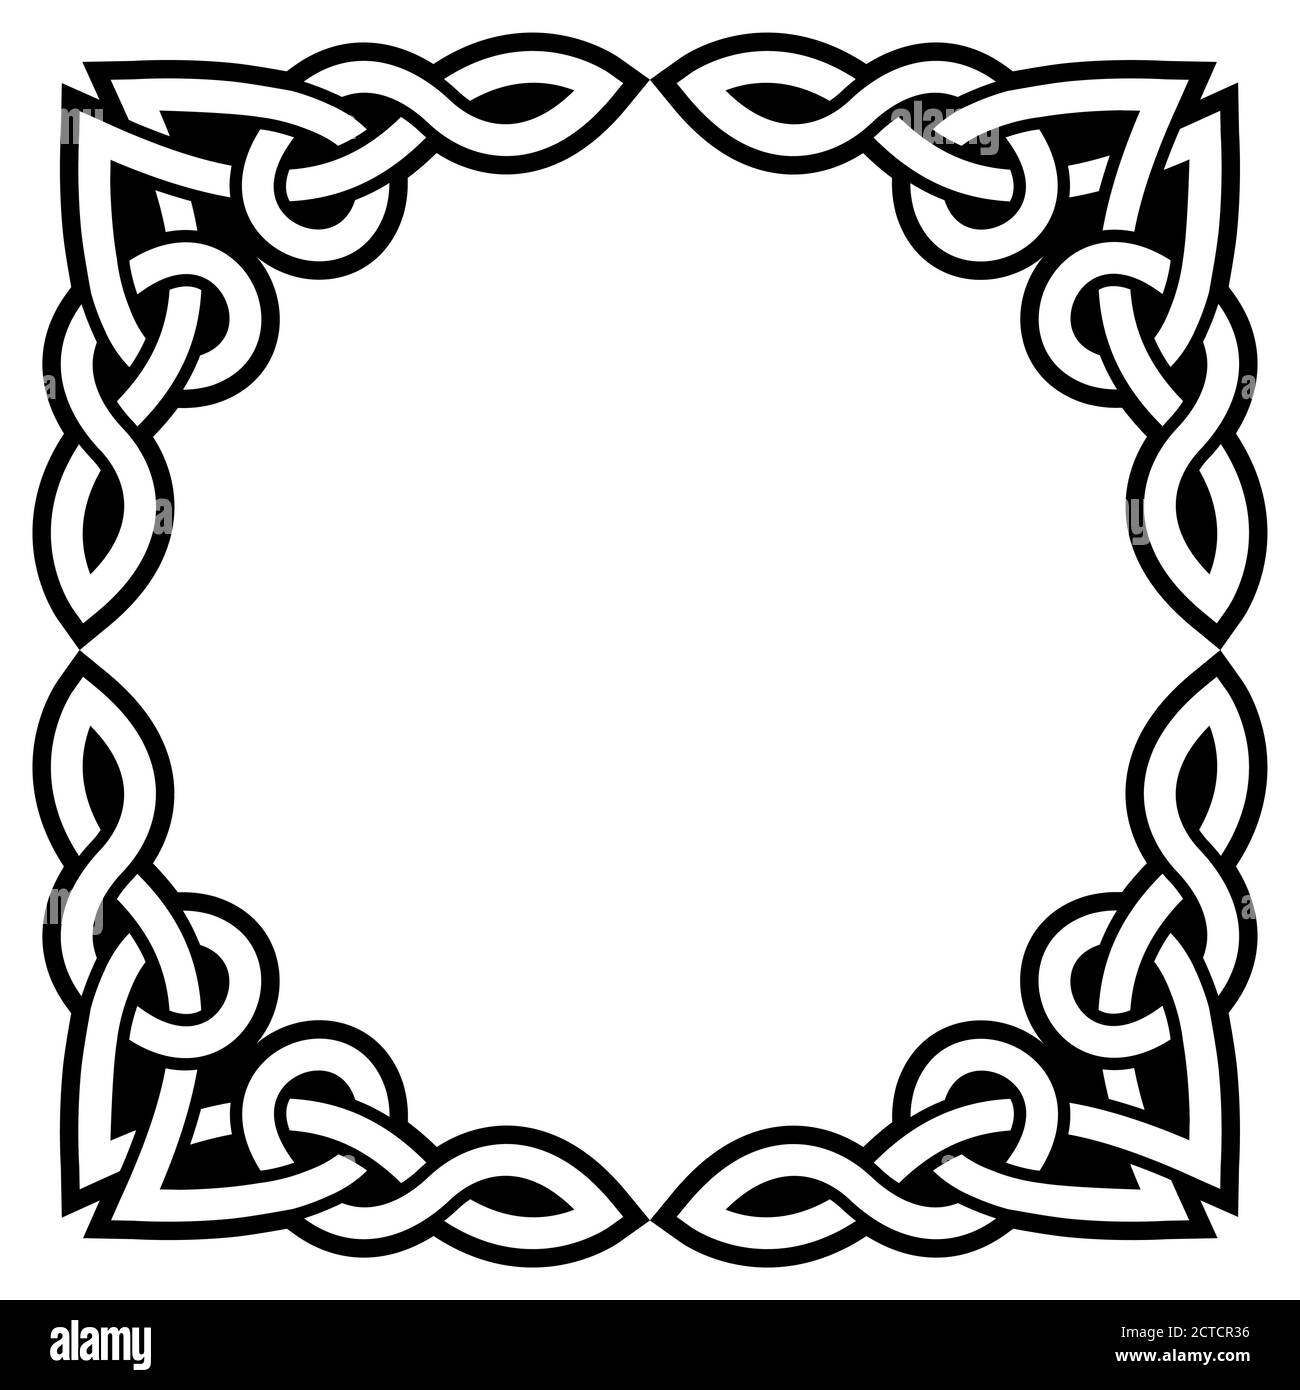 Irish Celtic vector square frame or border design perfect for greeting card or invitation Stock Vector